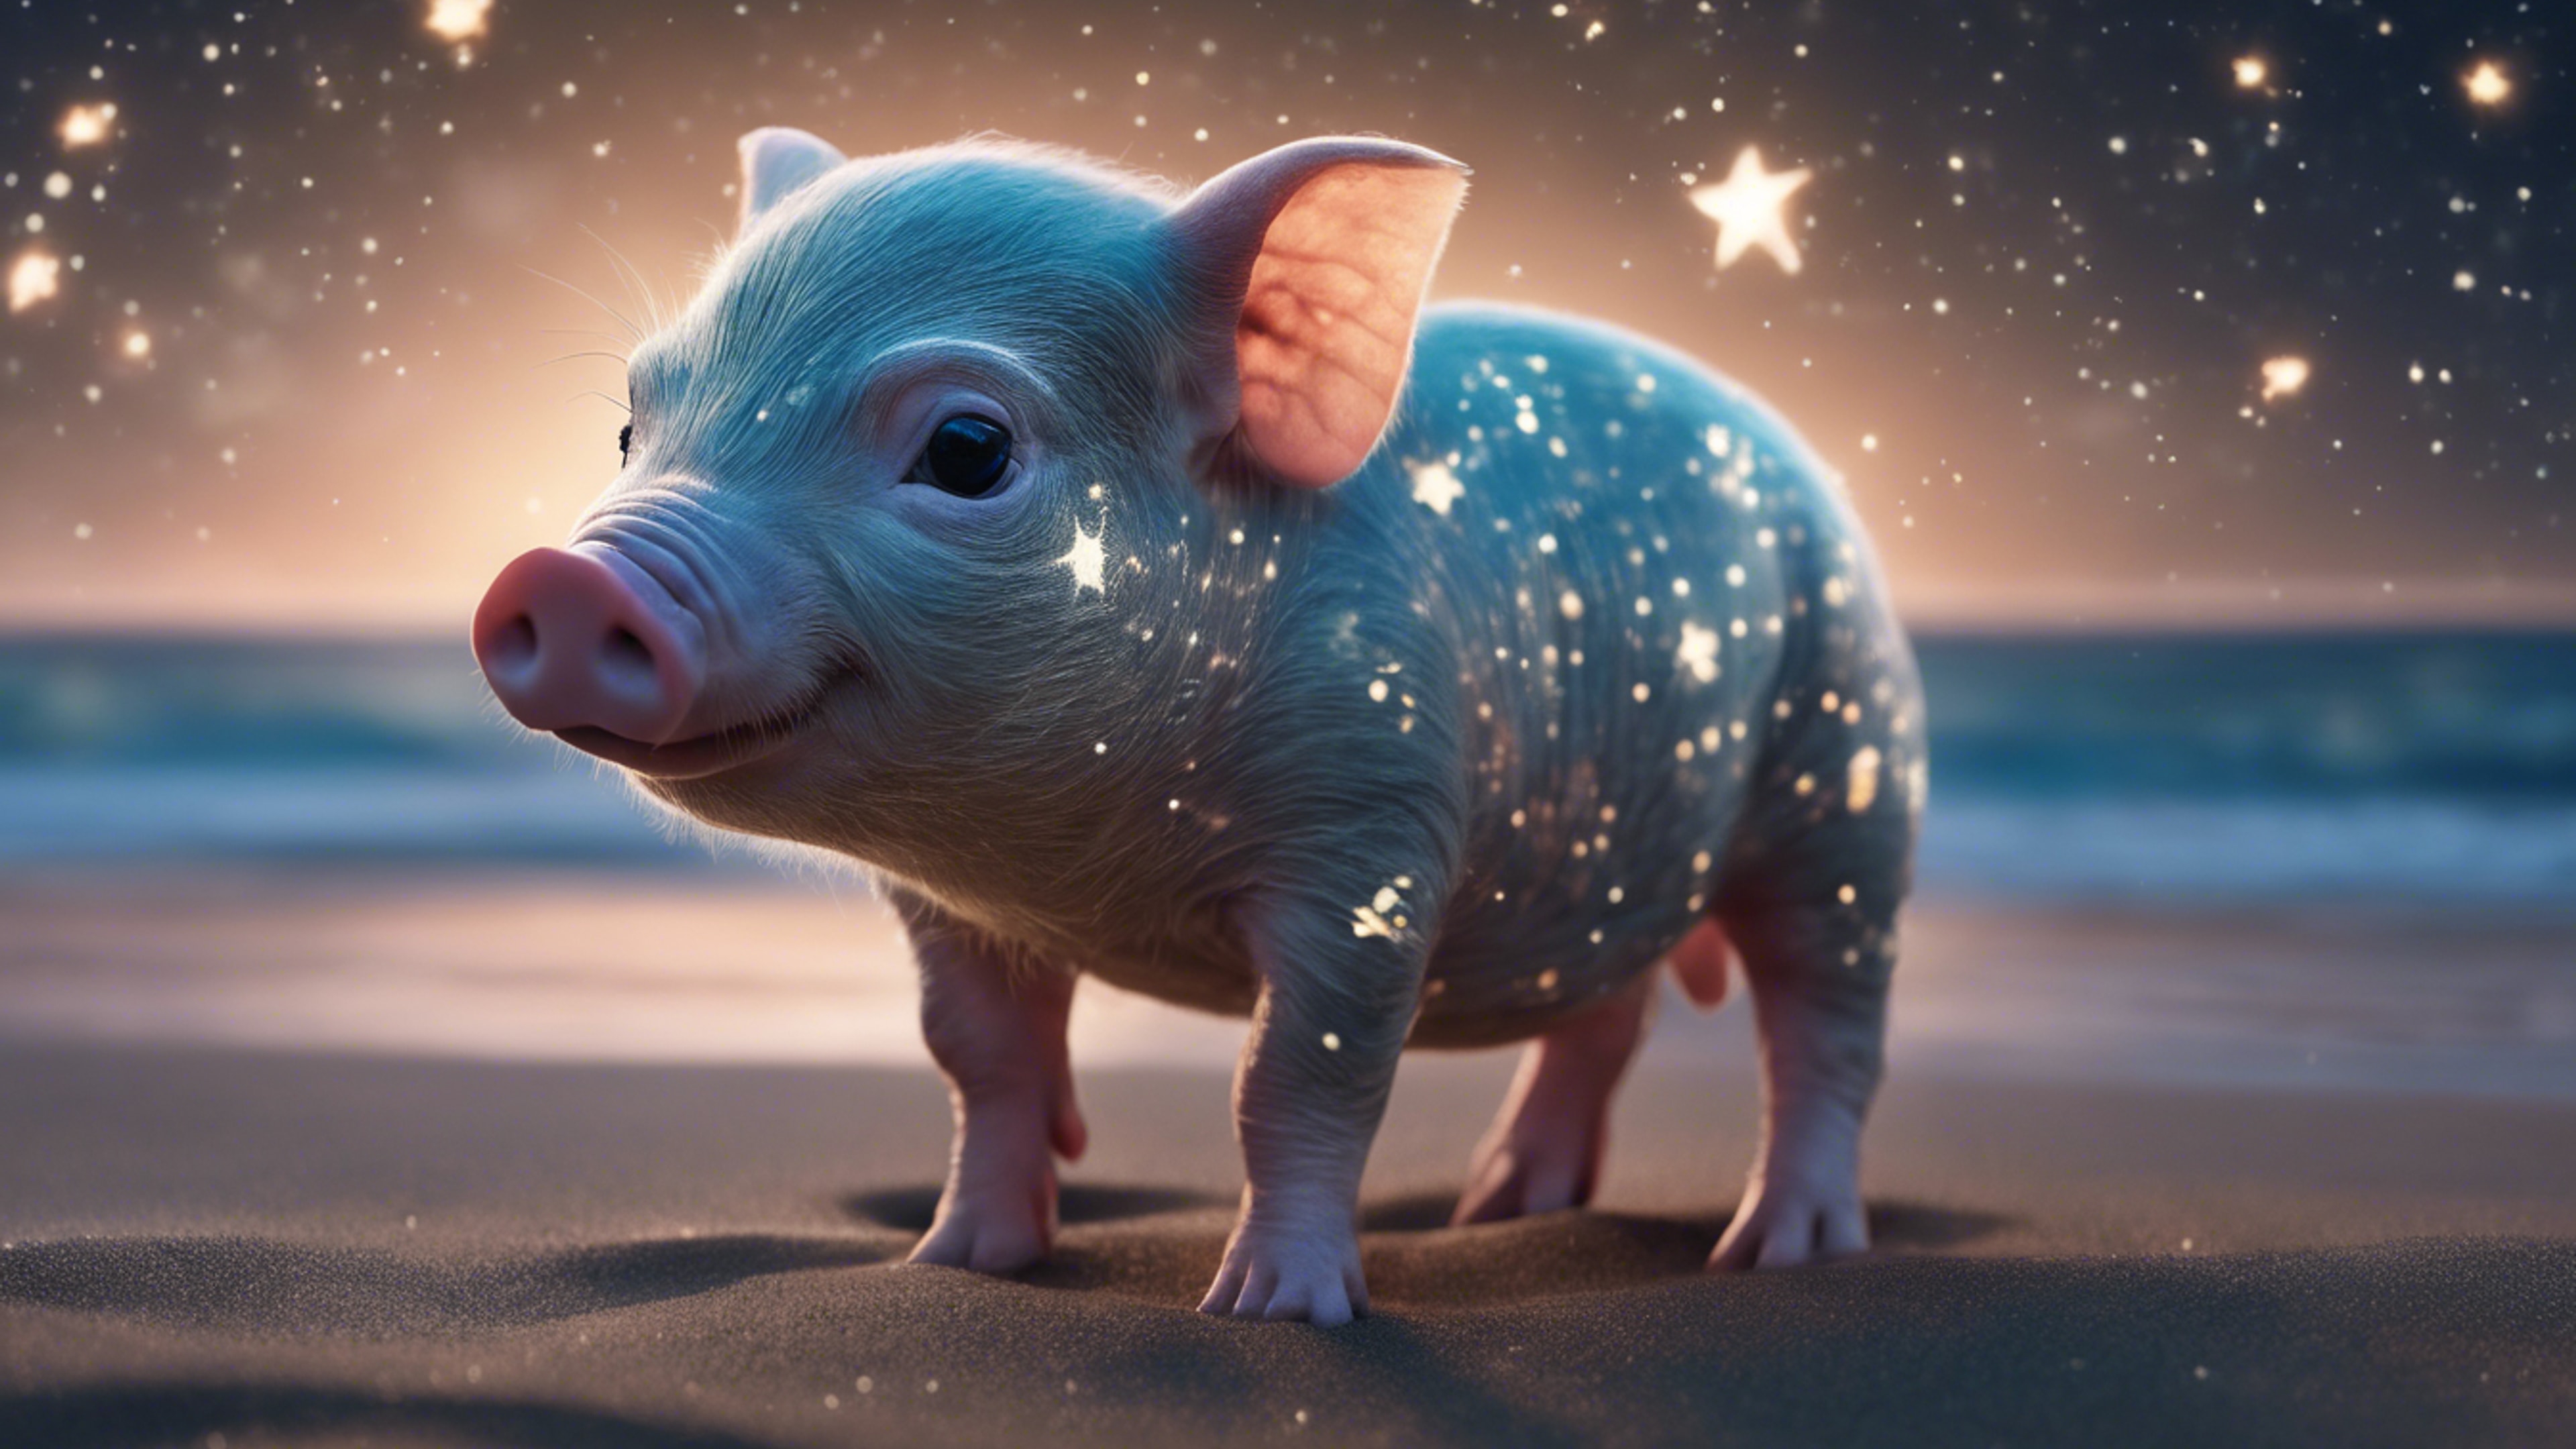 An unique digital rendering of a bioluminescent piglet on a calm beach under starry night sky. Обои[597018af159c4f7fa895]